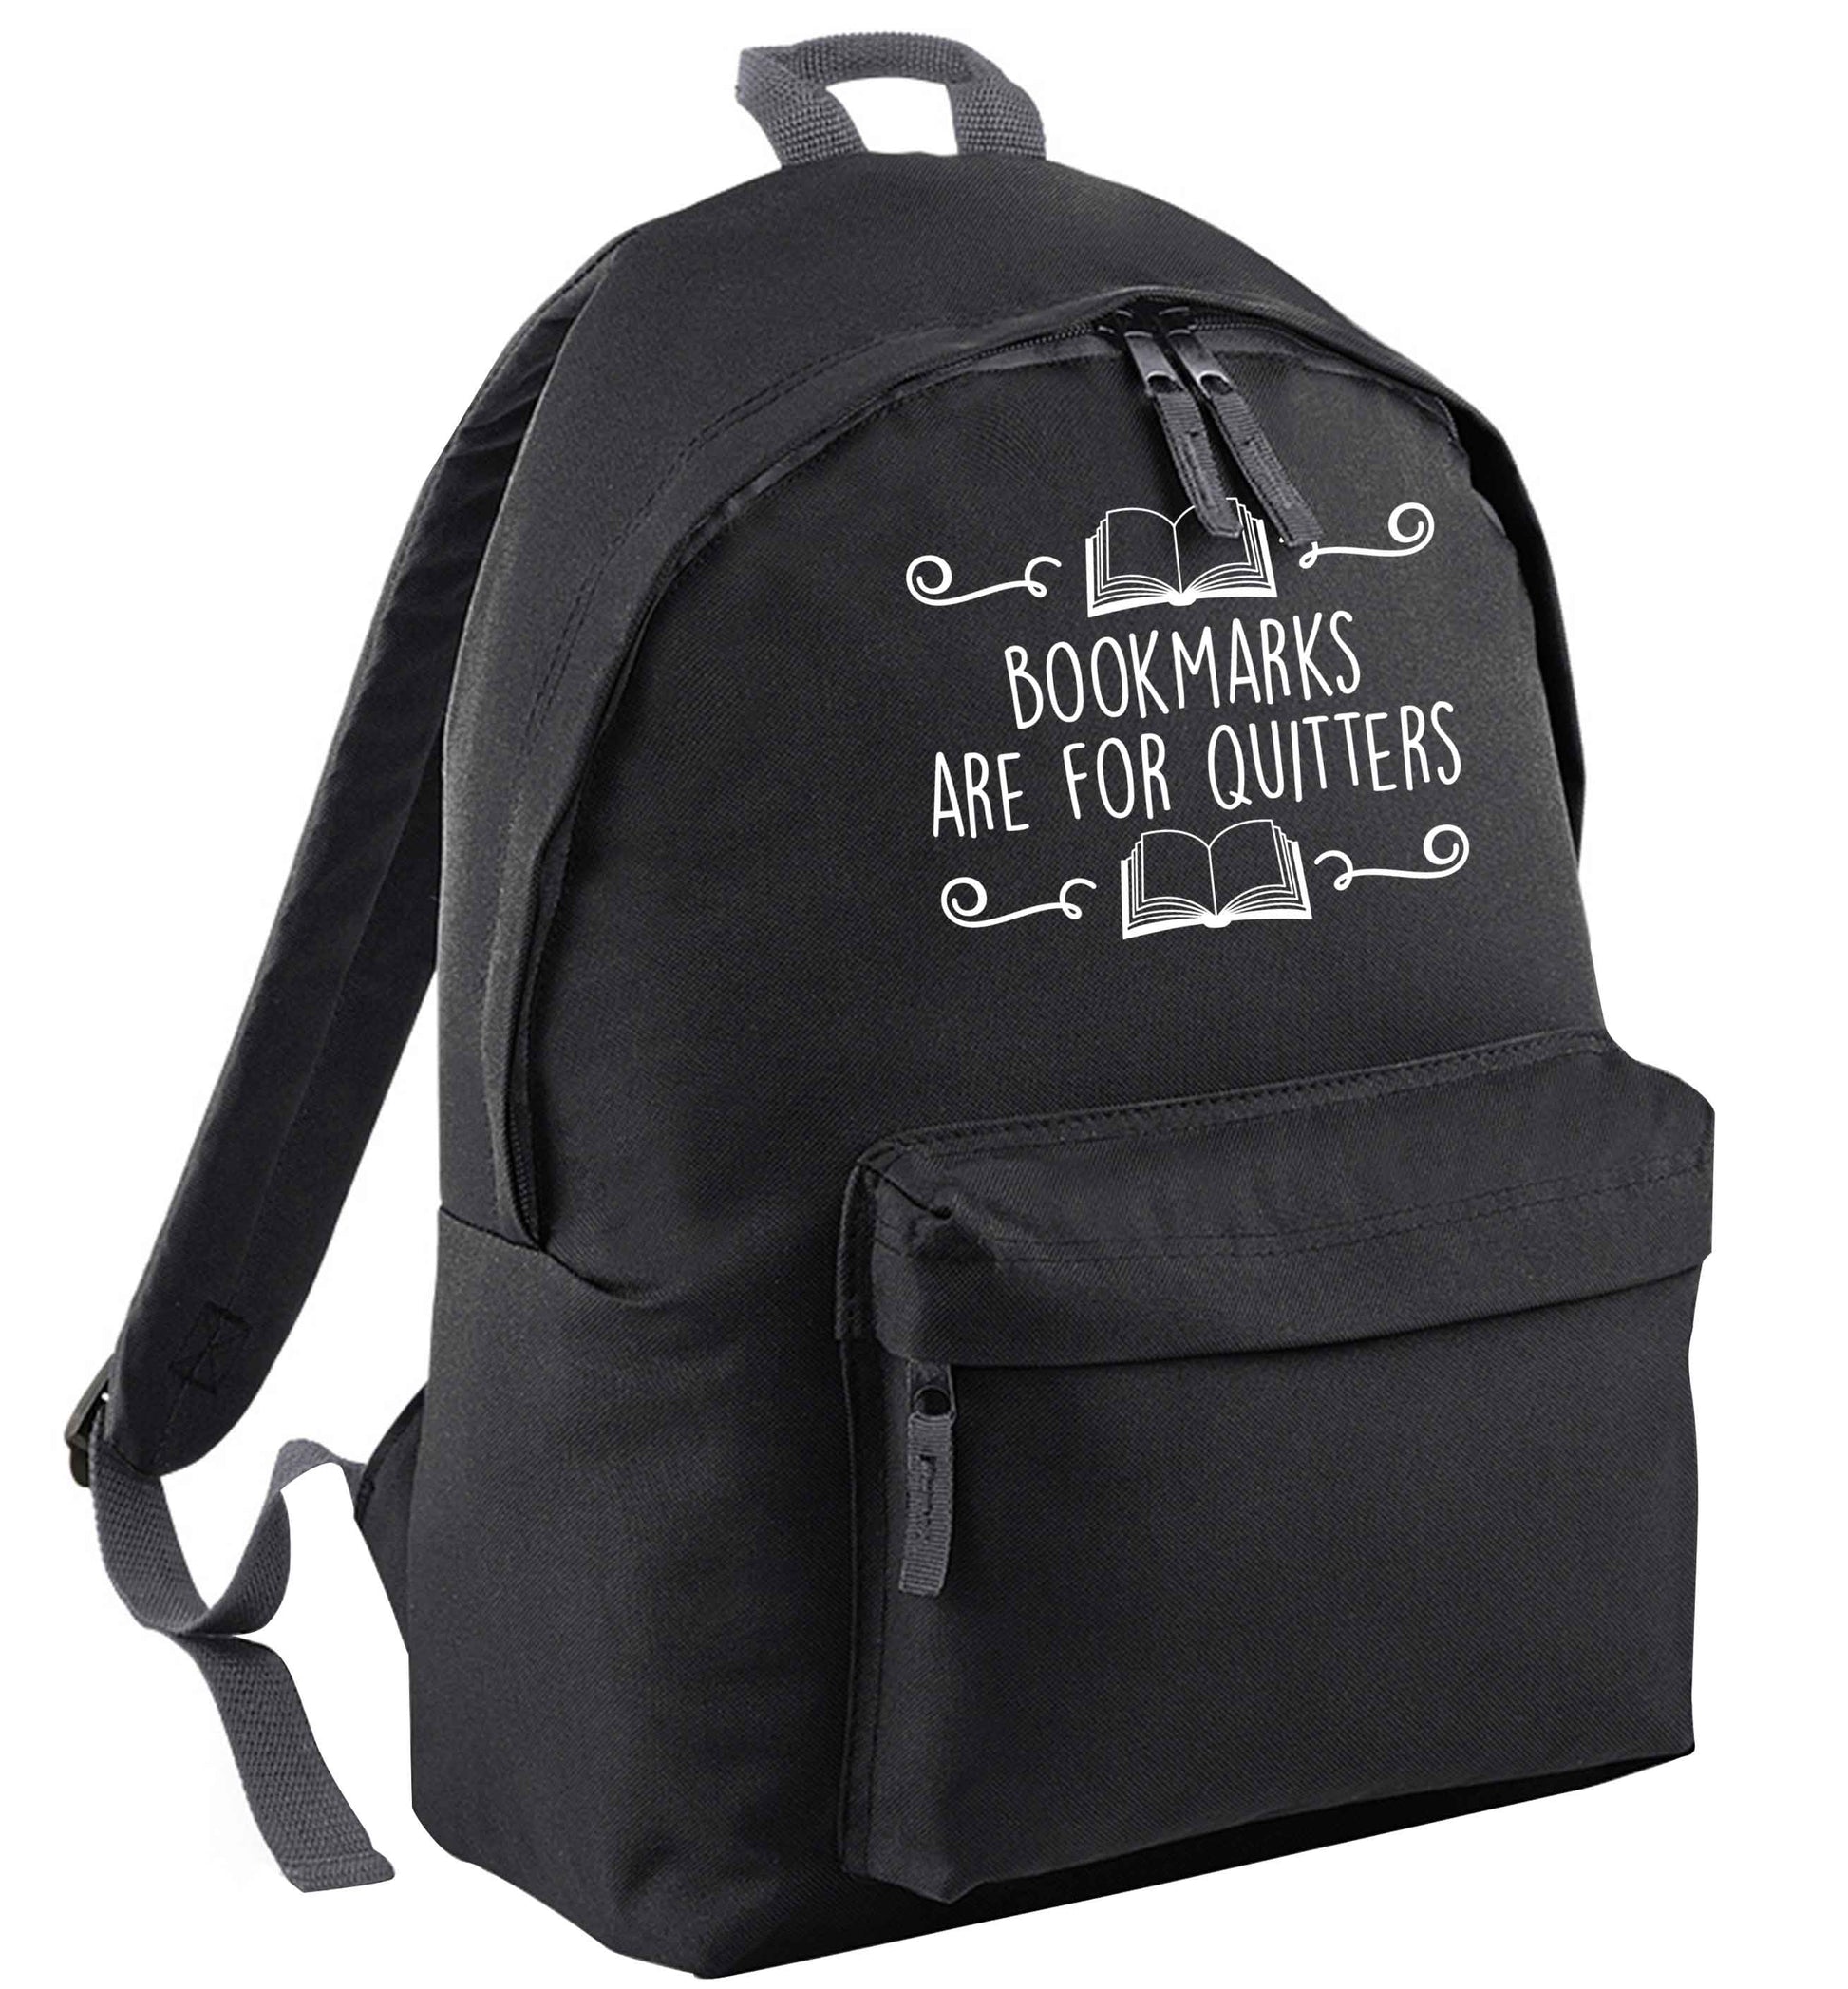 Bookmarks are for quitters black adults backpack